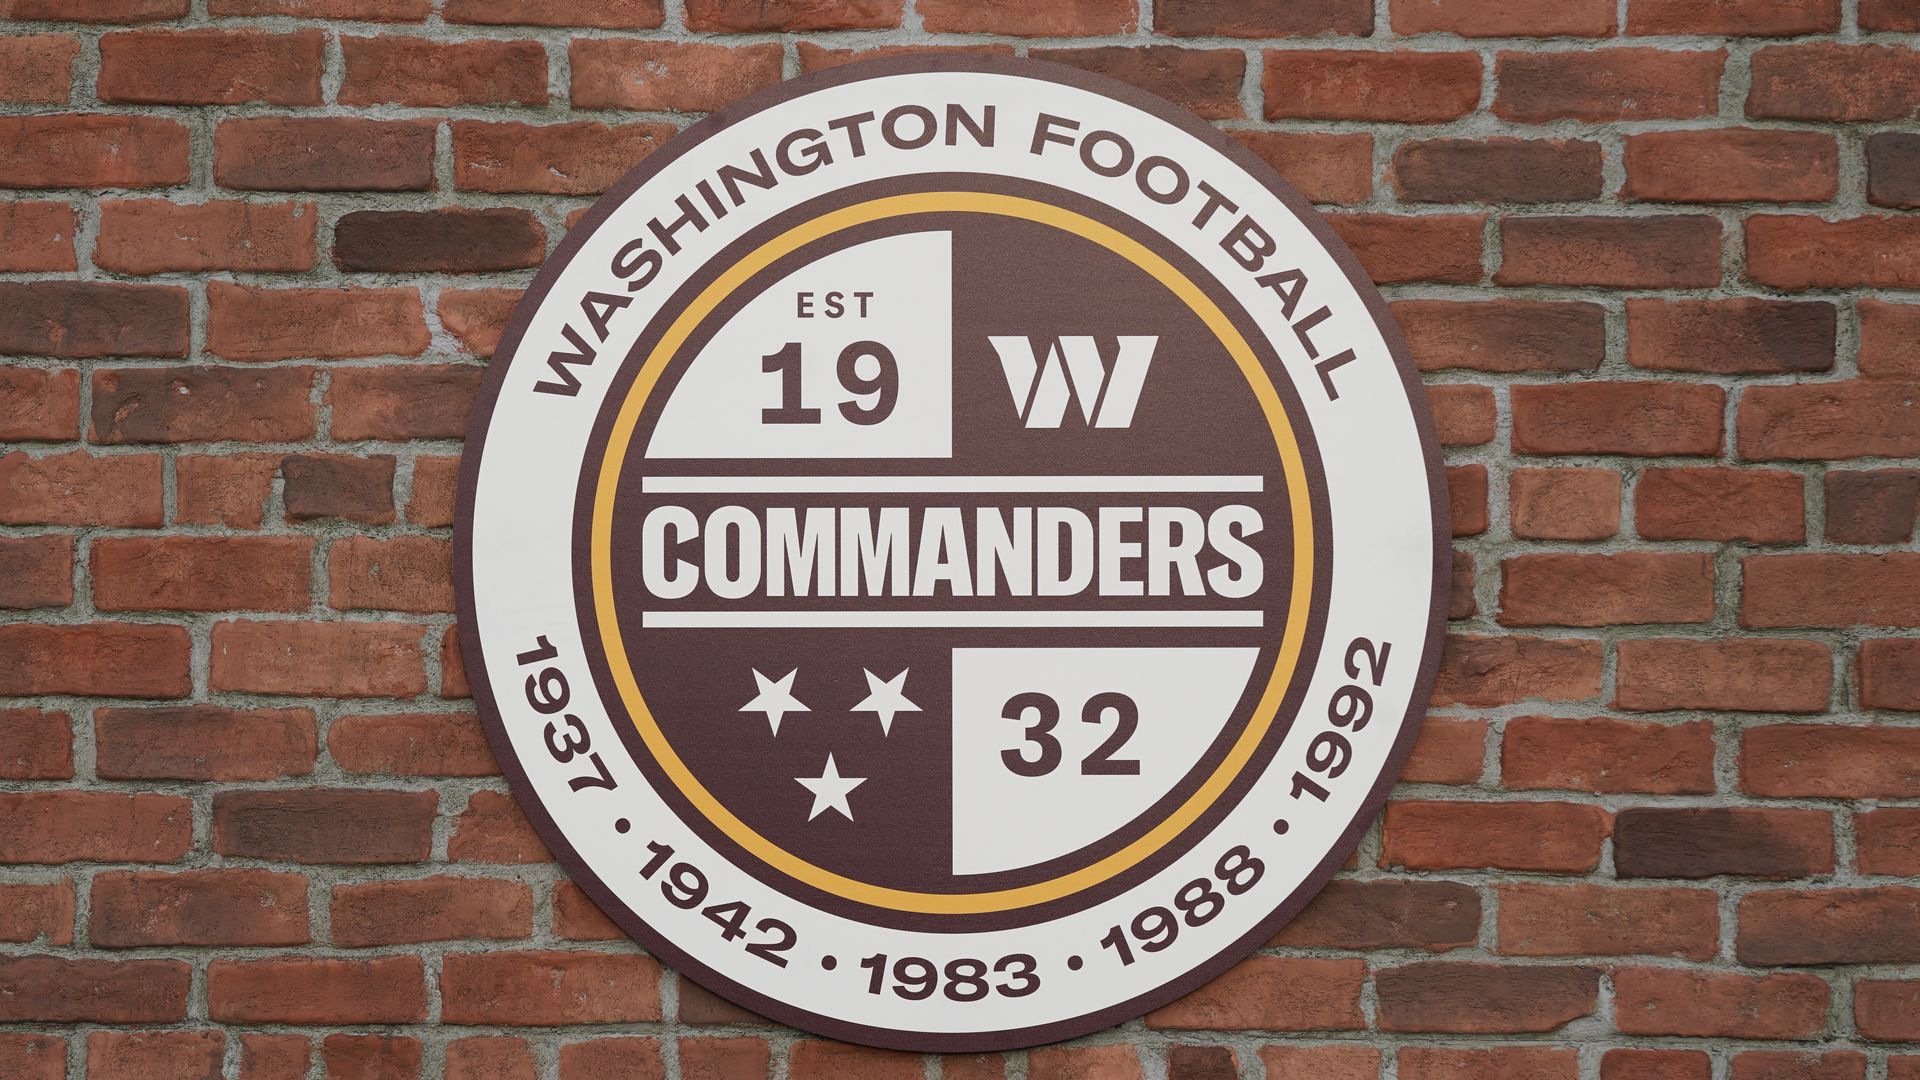 A Washington Commanders sign is shown as they unveil their NFL football team's new identity.